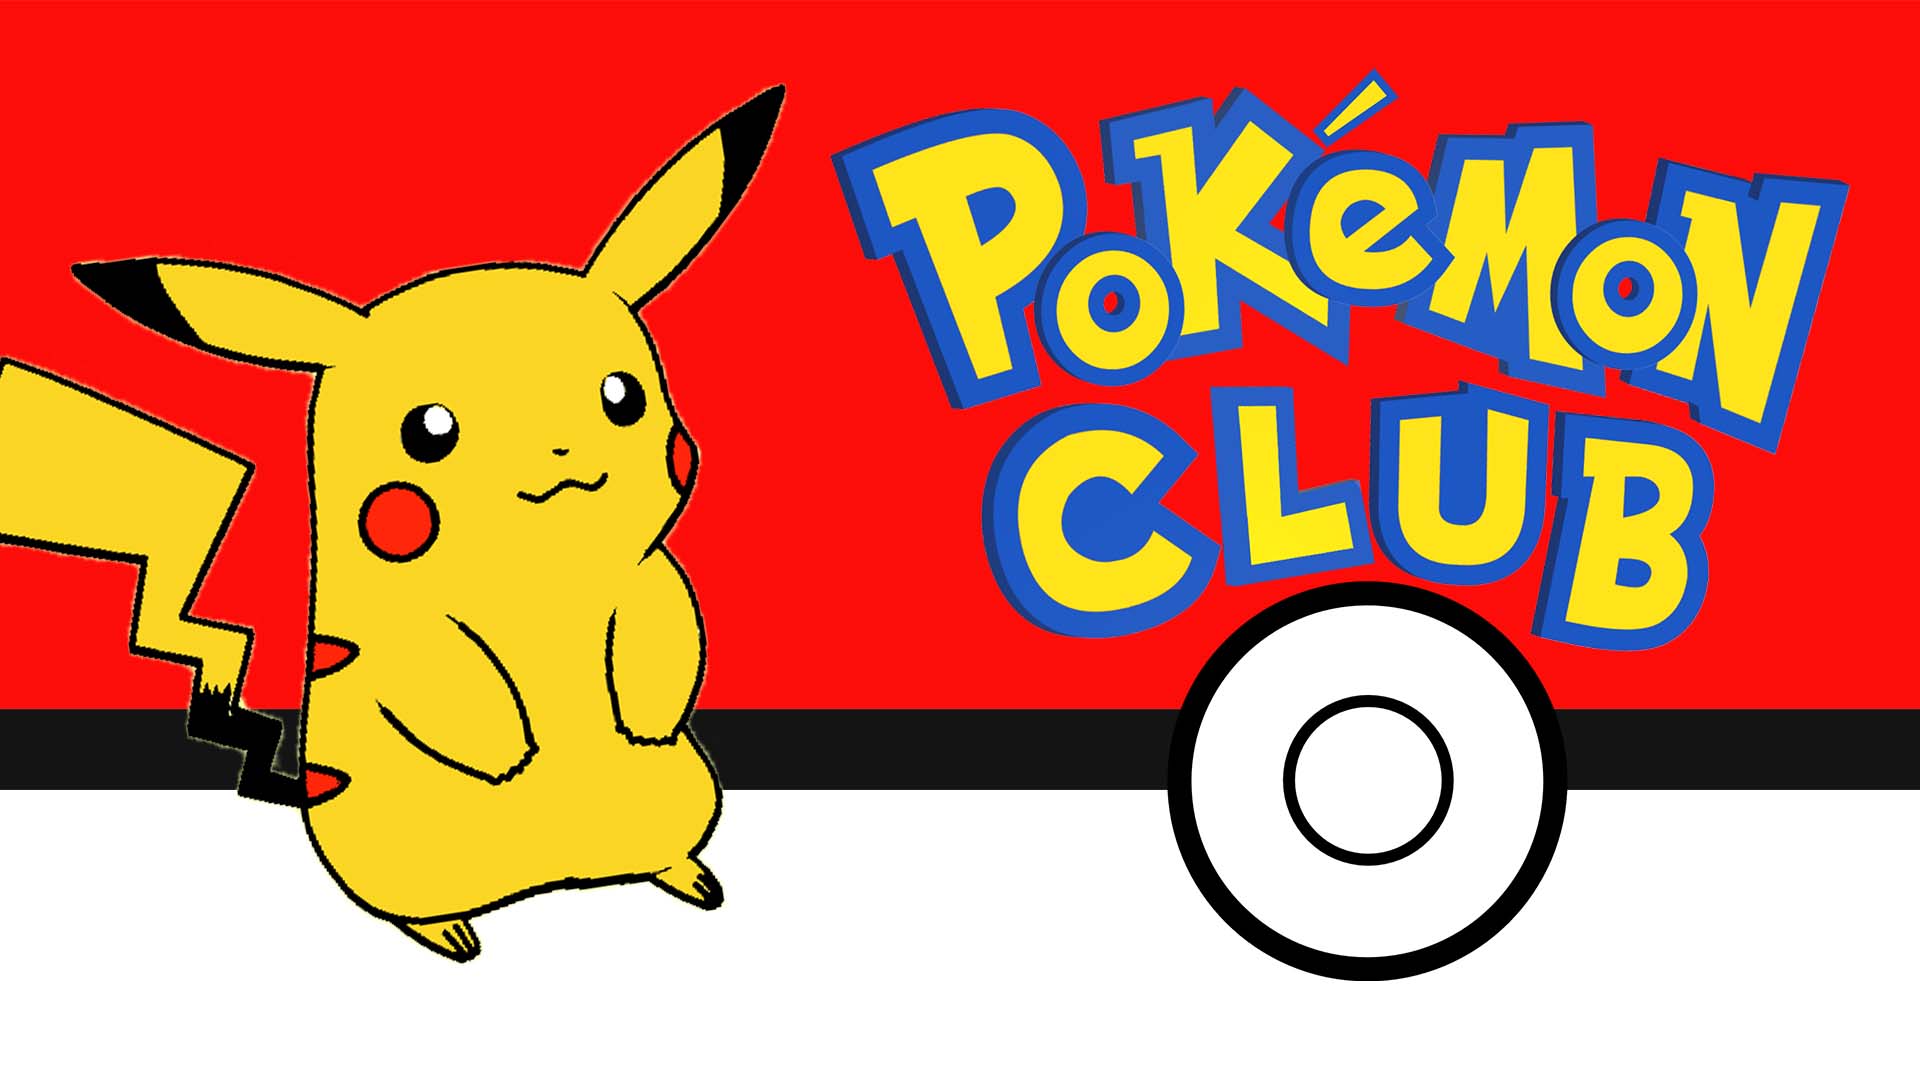 Image shows a Pikachu character on the left side in front of a red, black, and white background. The words "Pokémon Club" are in yellow with thick blue outlines on the right arched above white and black circles designed to represent Poké Balls.